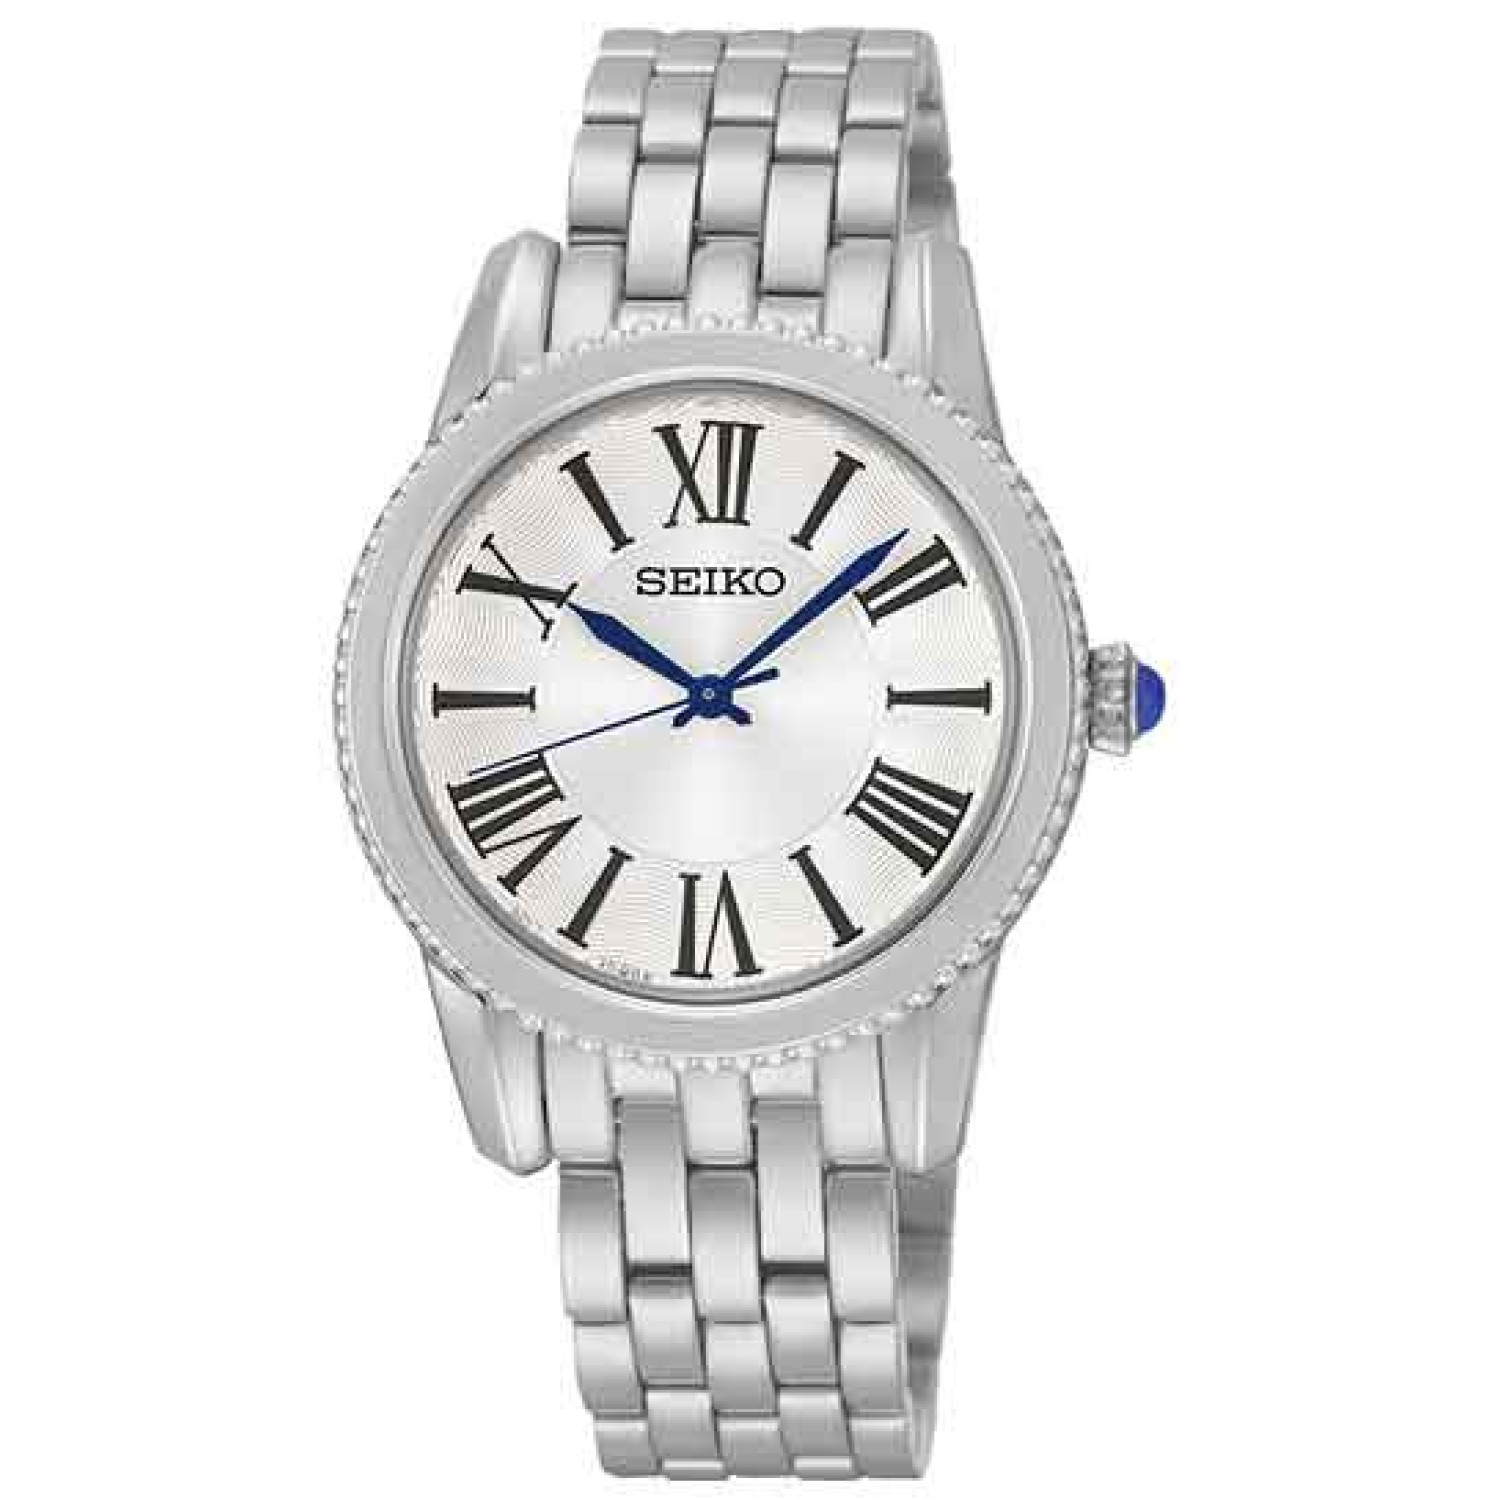 SRZ437P Seiko Ladies Conceptual Watch. A Seiko Ladies Conceptual Watch available in store at Christies Papatoetoe or online   LAYBUY - Pay it easy, in 6 weekly payments and have it now. Only pay the price of your purchase, when you pay your @christies.onl